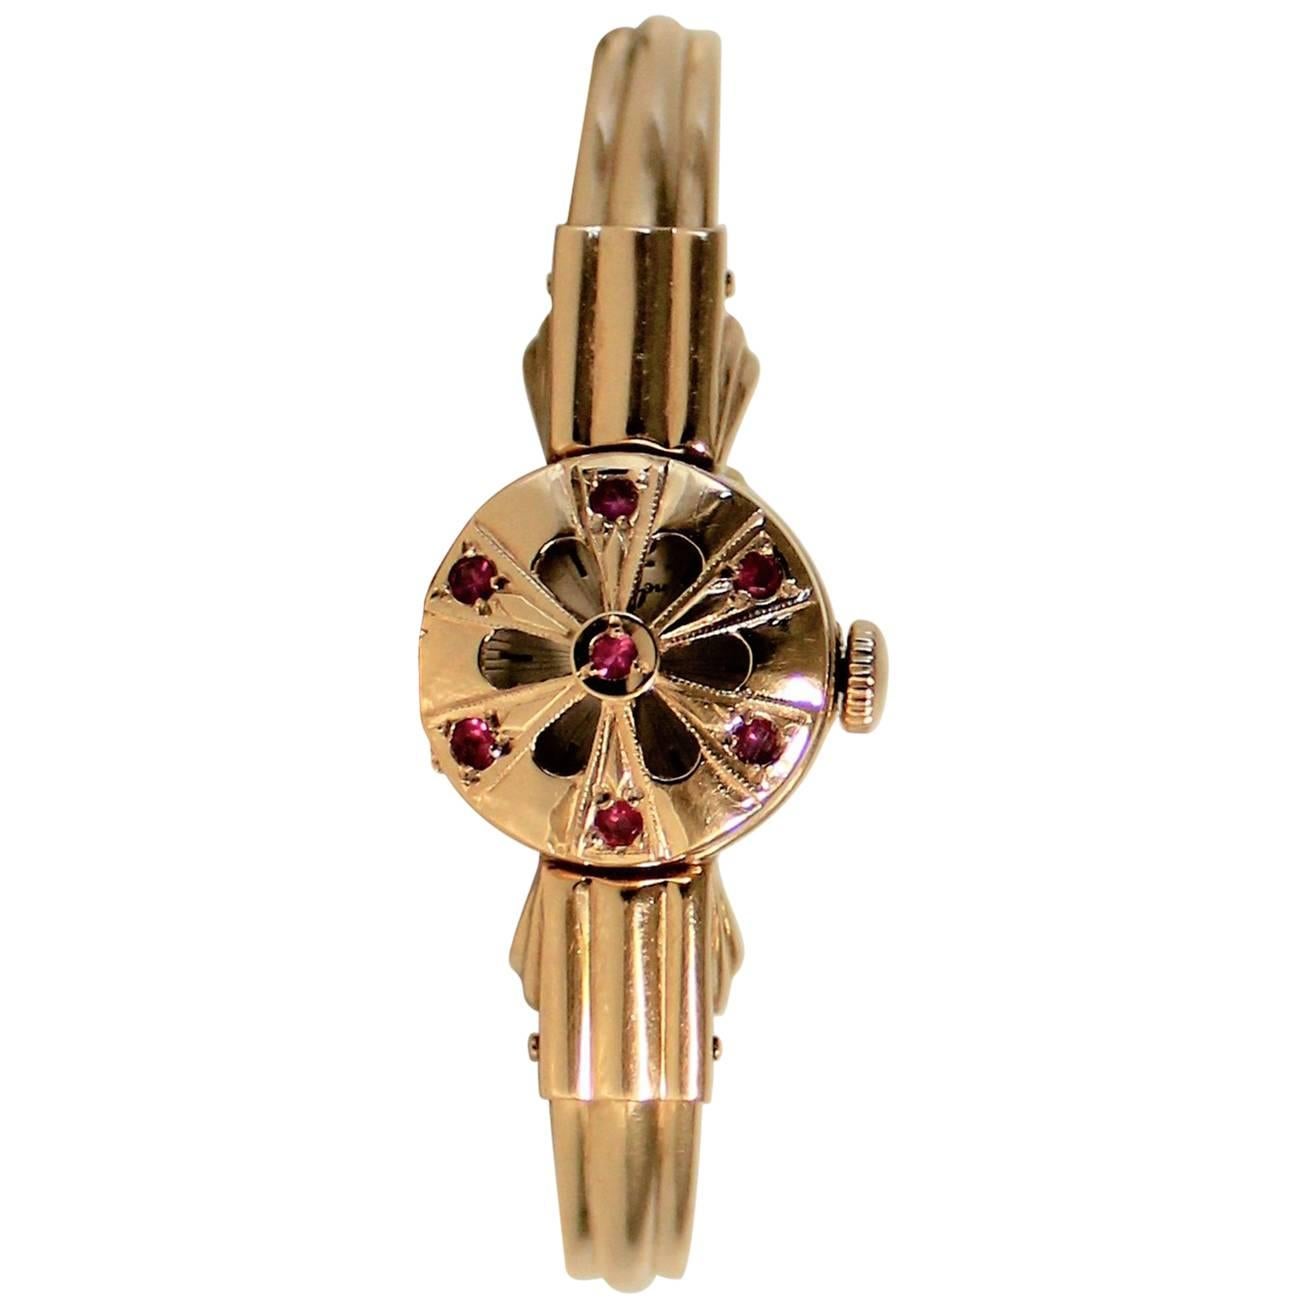 14-carat Gold Russian Haupu Ladies Hunter Watch with Rubies For Sale